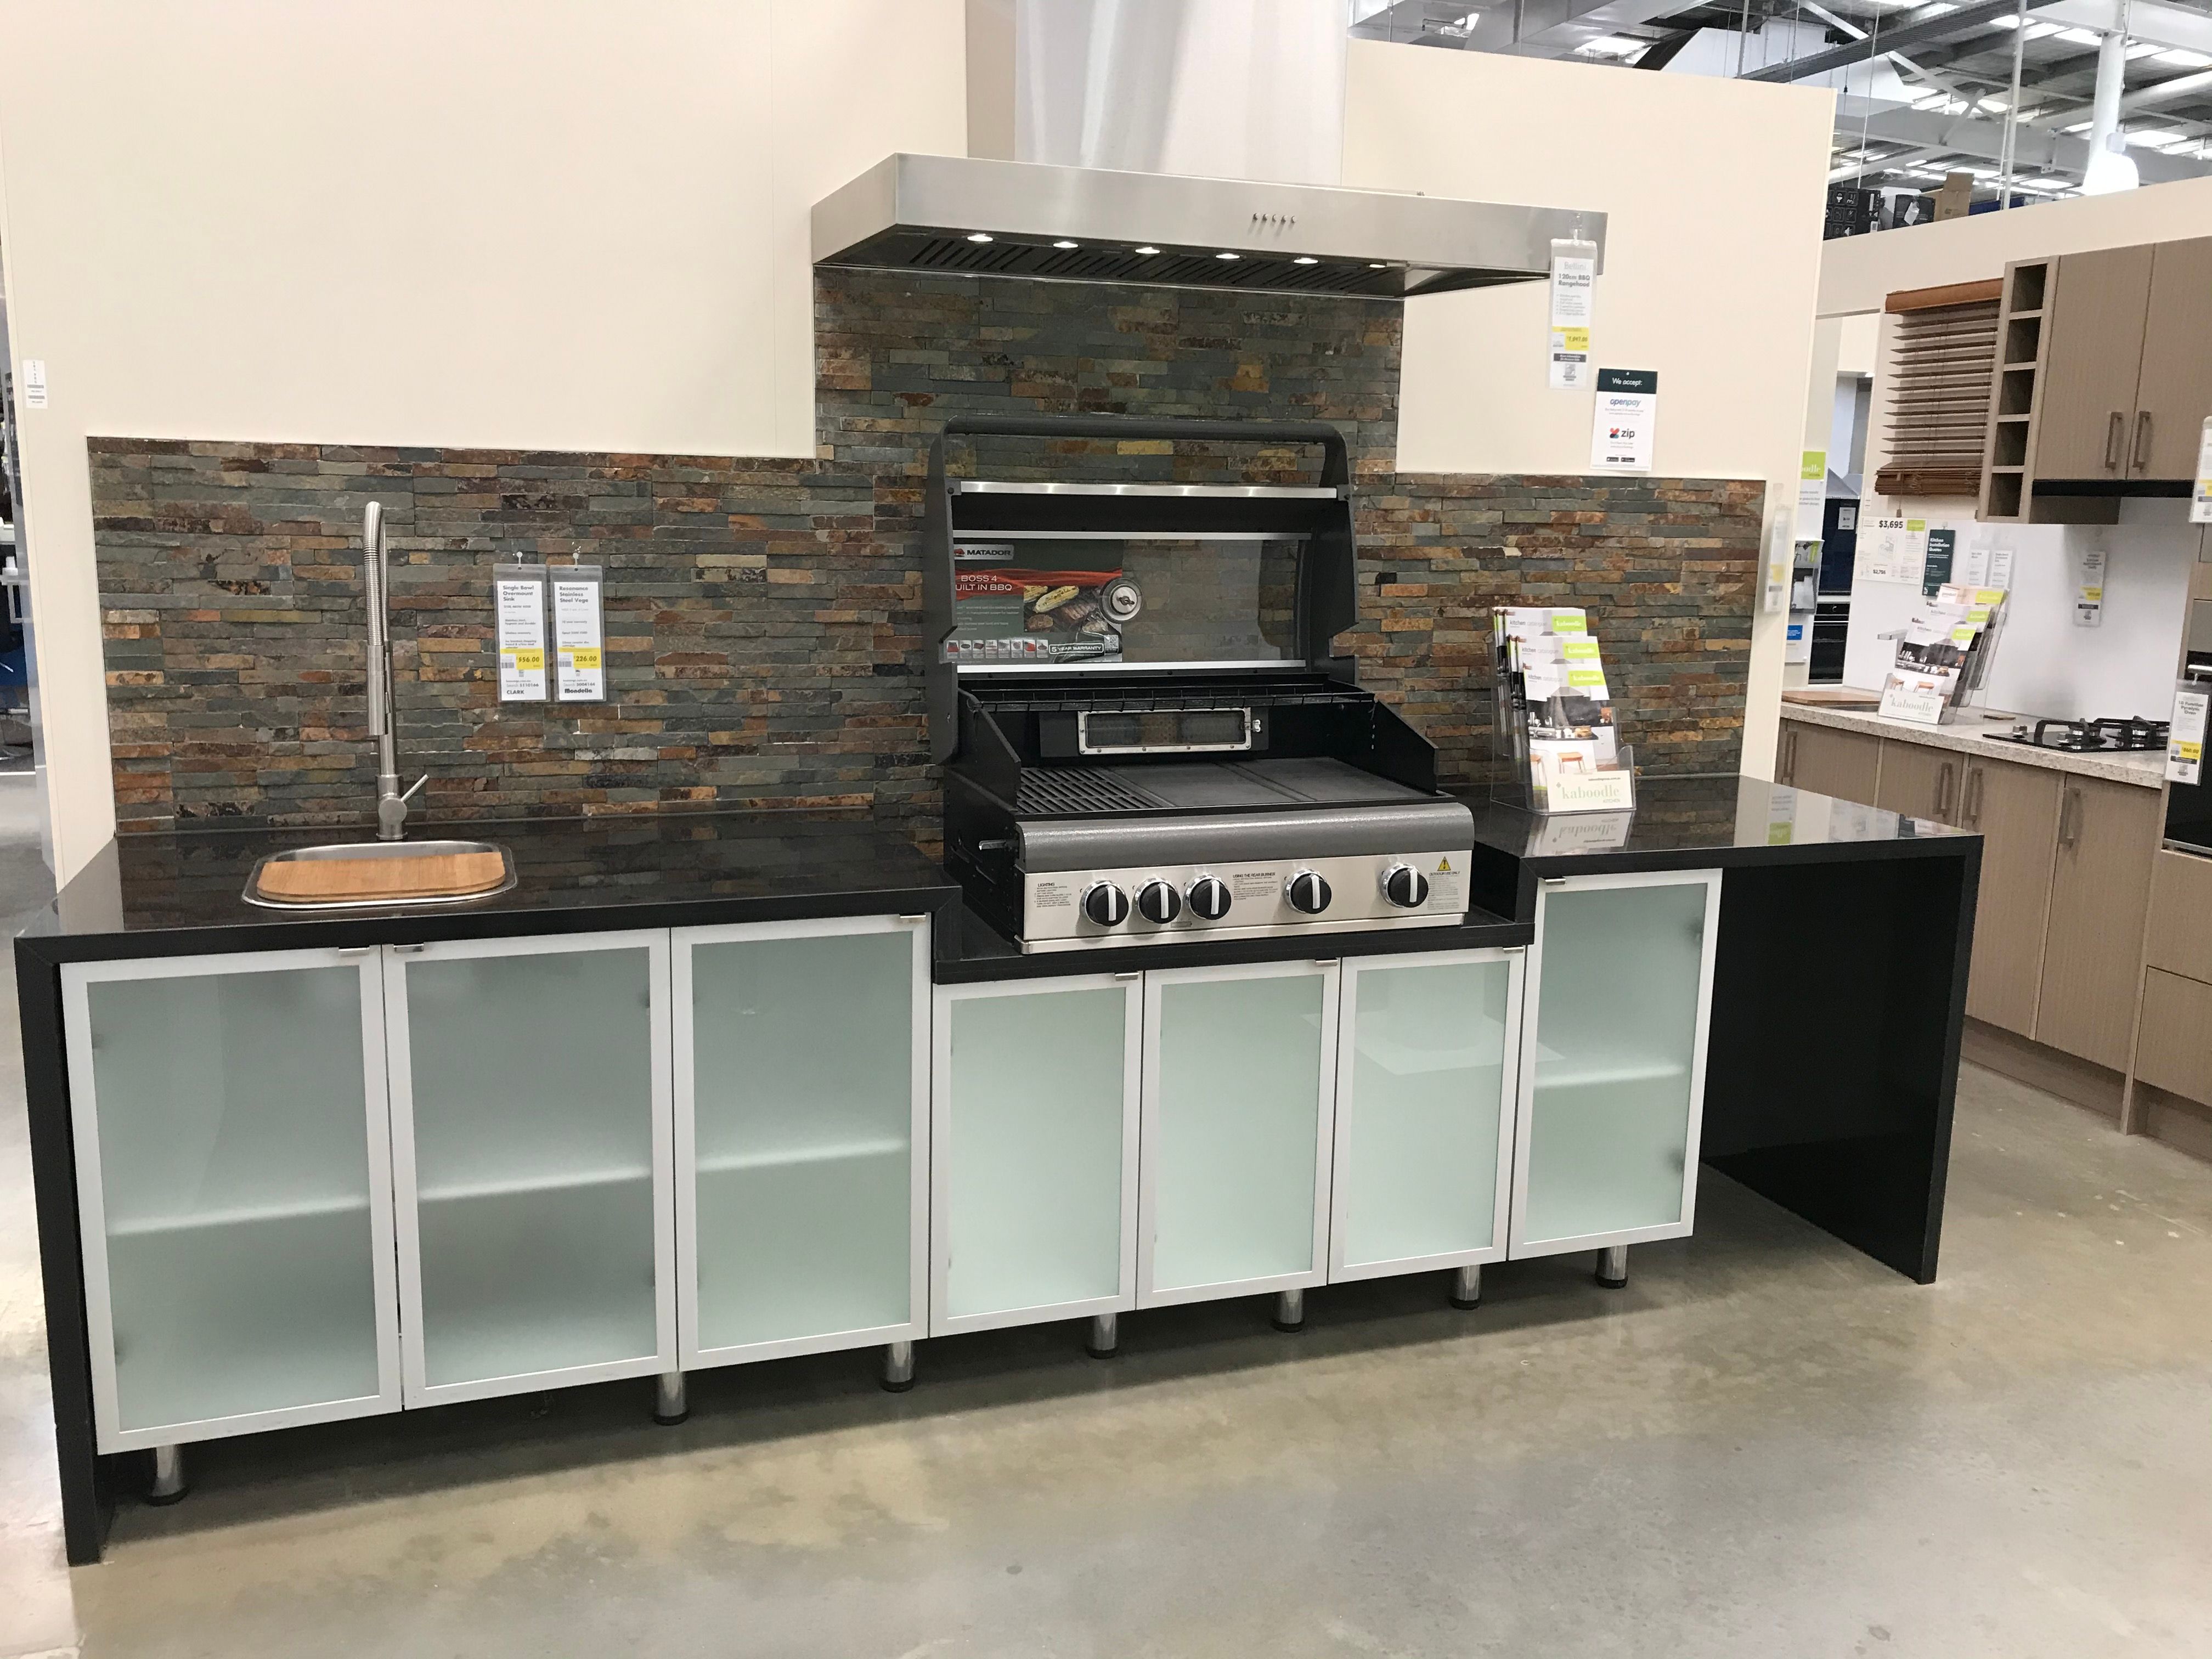 Outdoor kitchen ideas wanted   Bunnings Workshop community